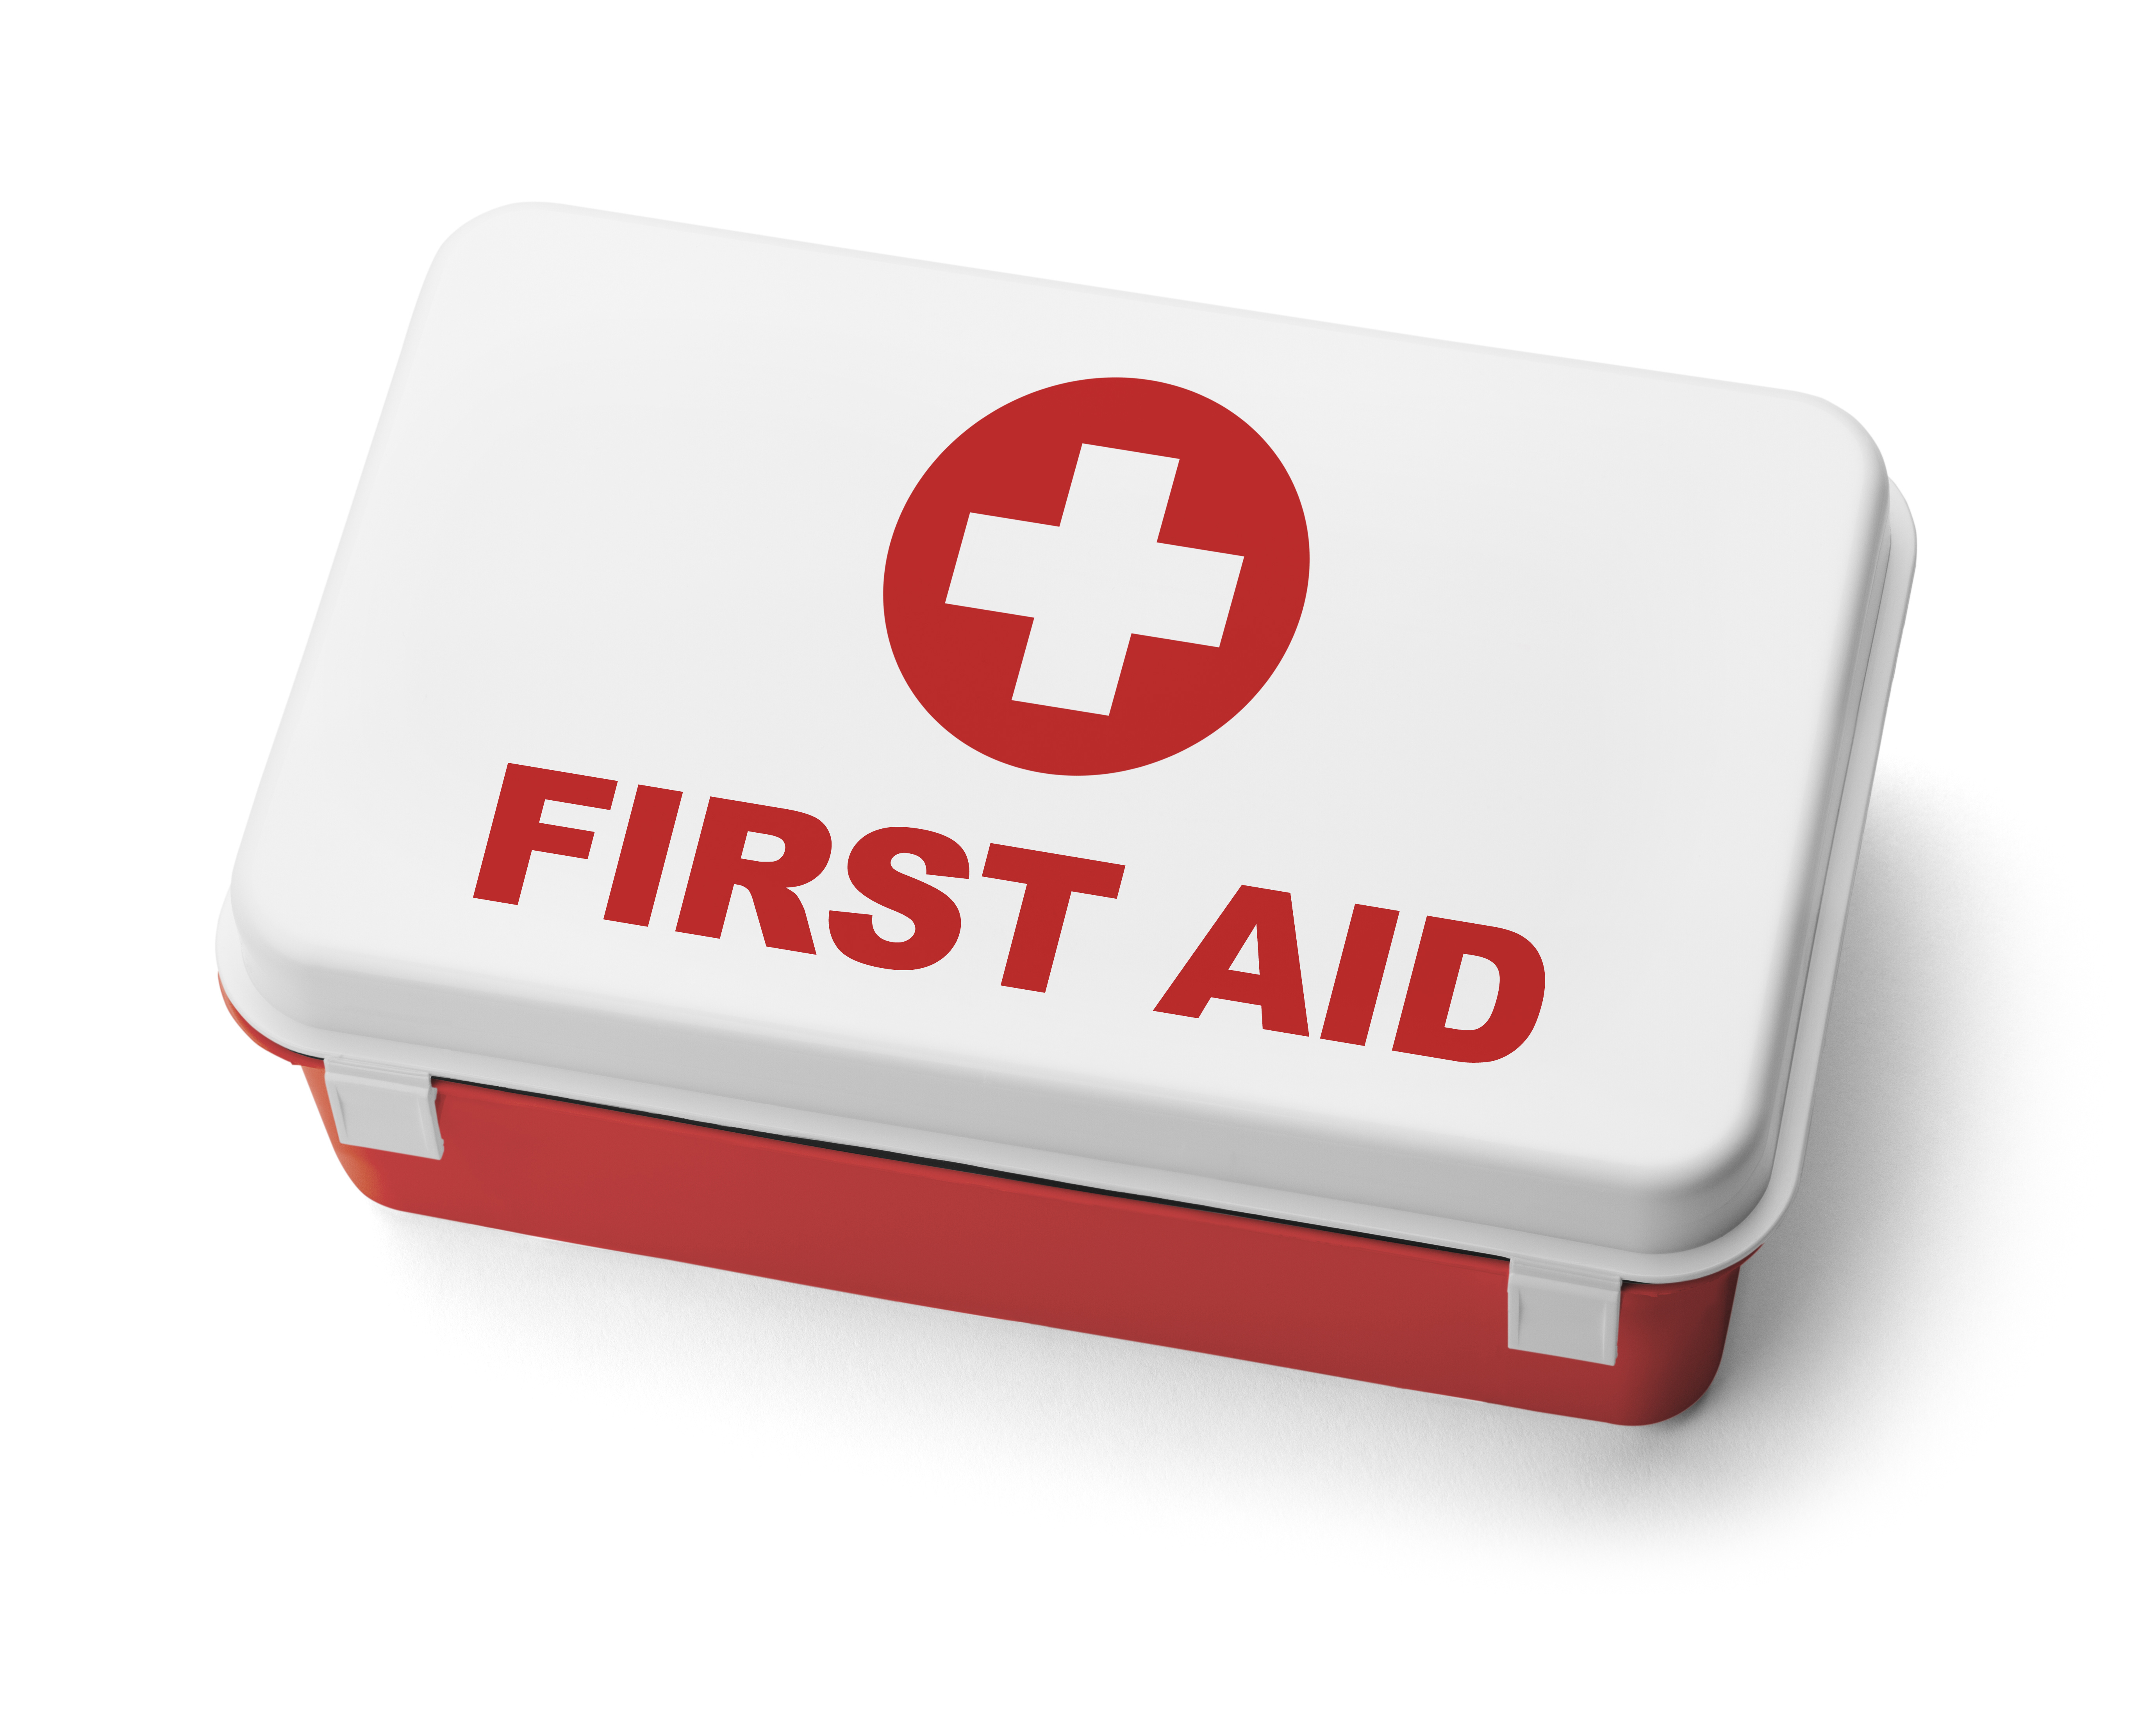 Red Plastic First Aid Kit Box Isolated on White Background.